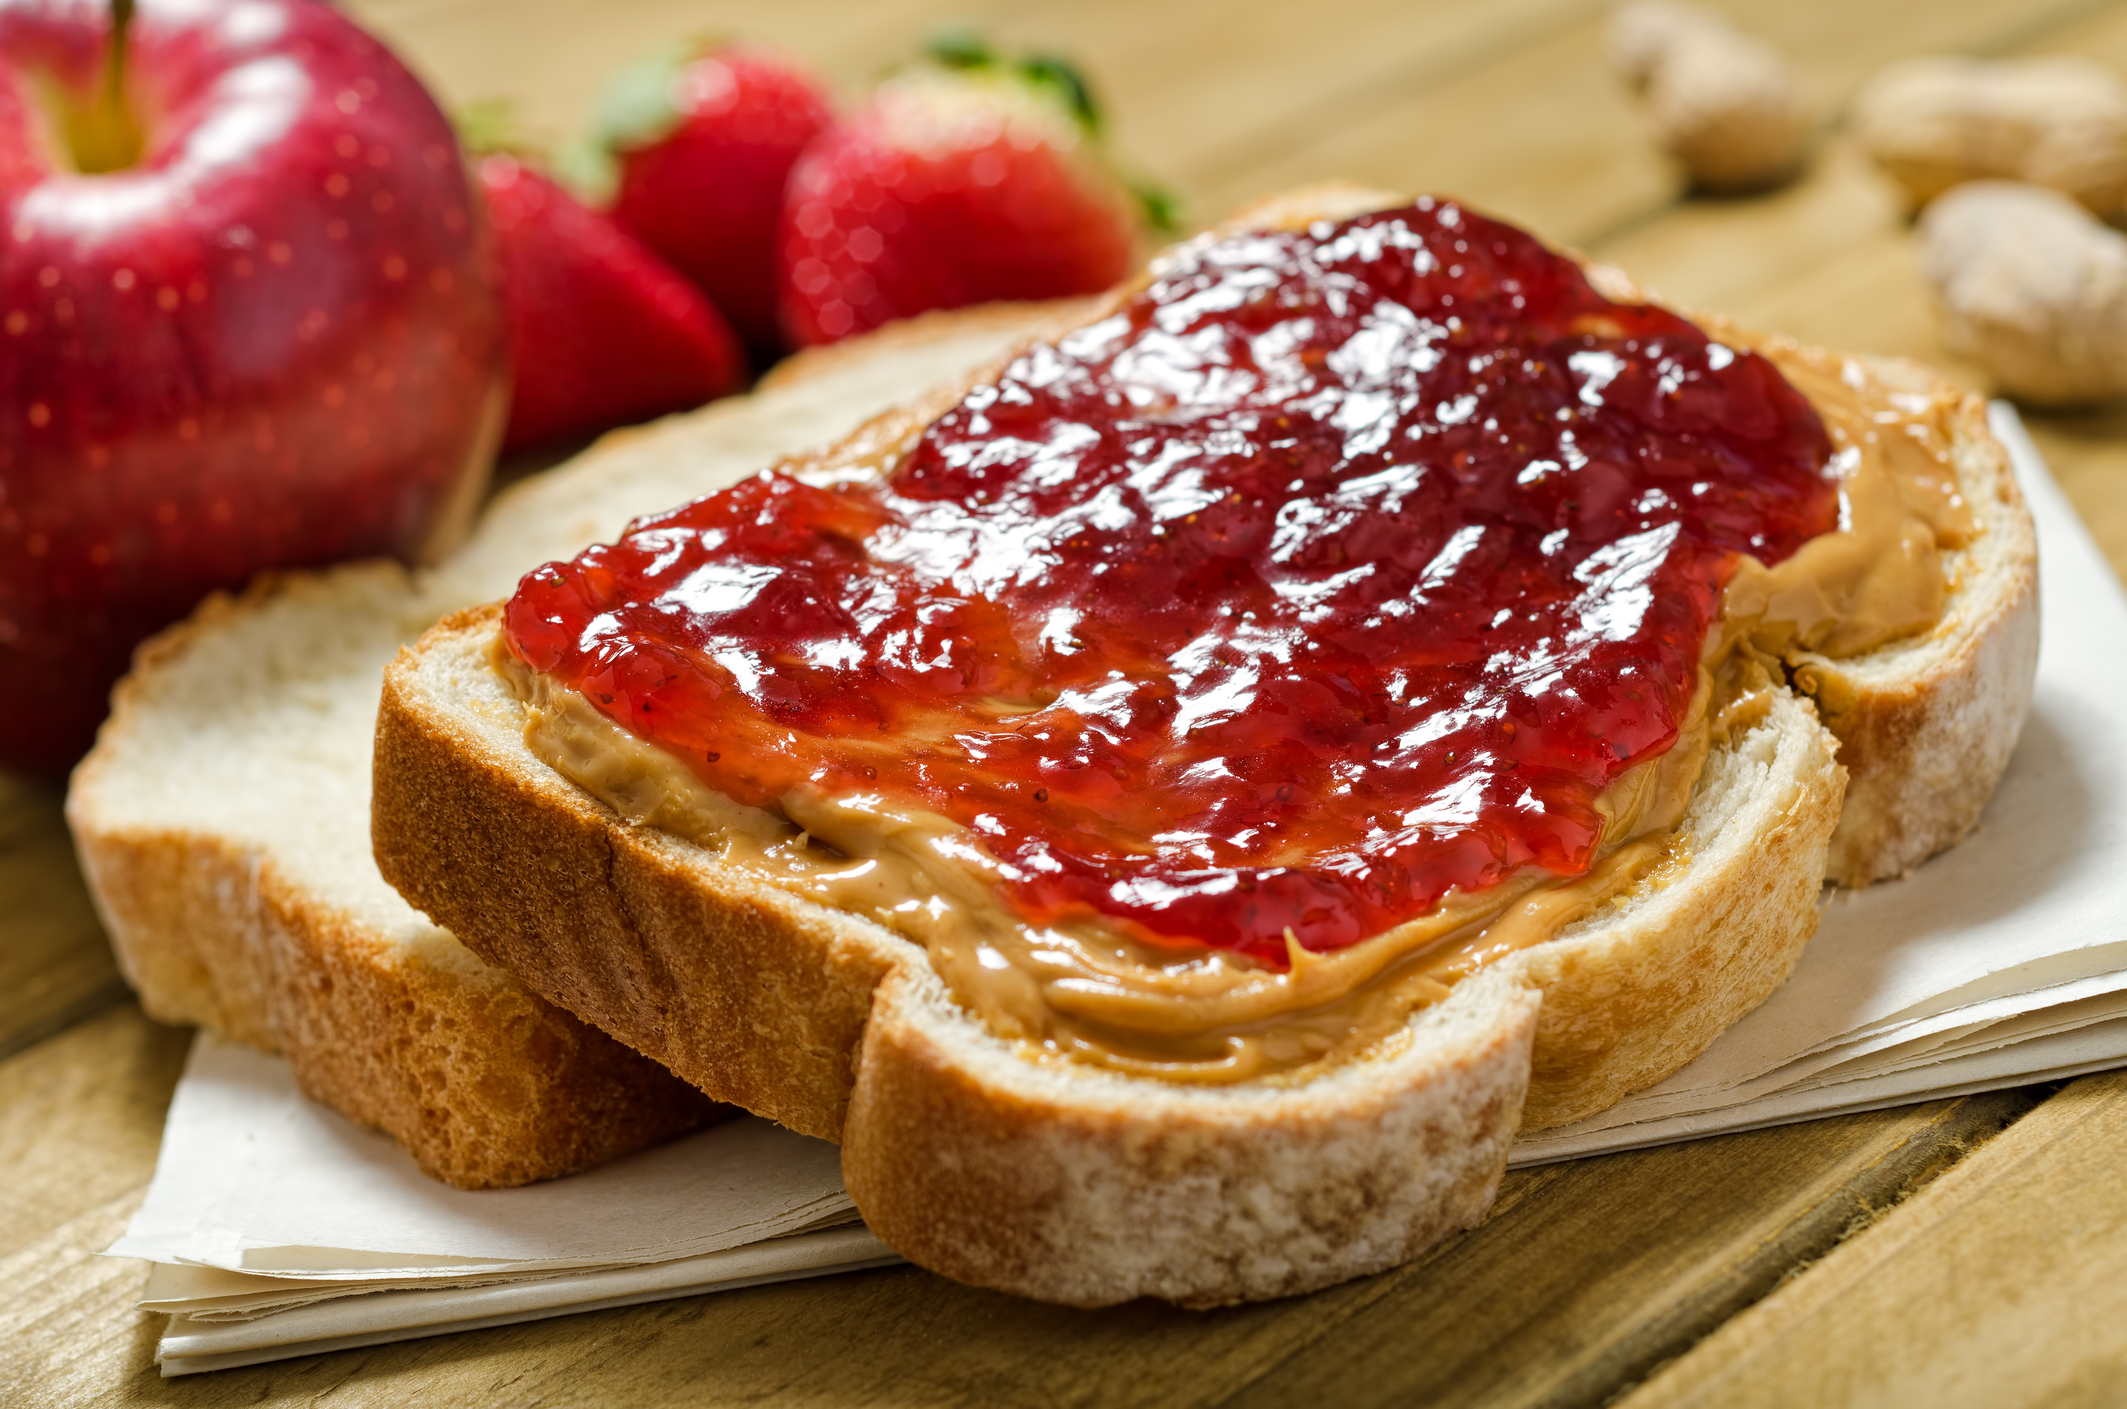 The Best Way To Make Peanut Butter And Jelly Sandwiches